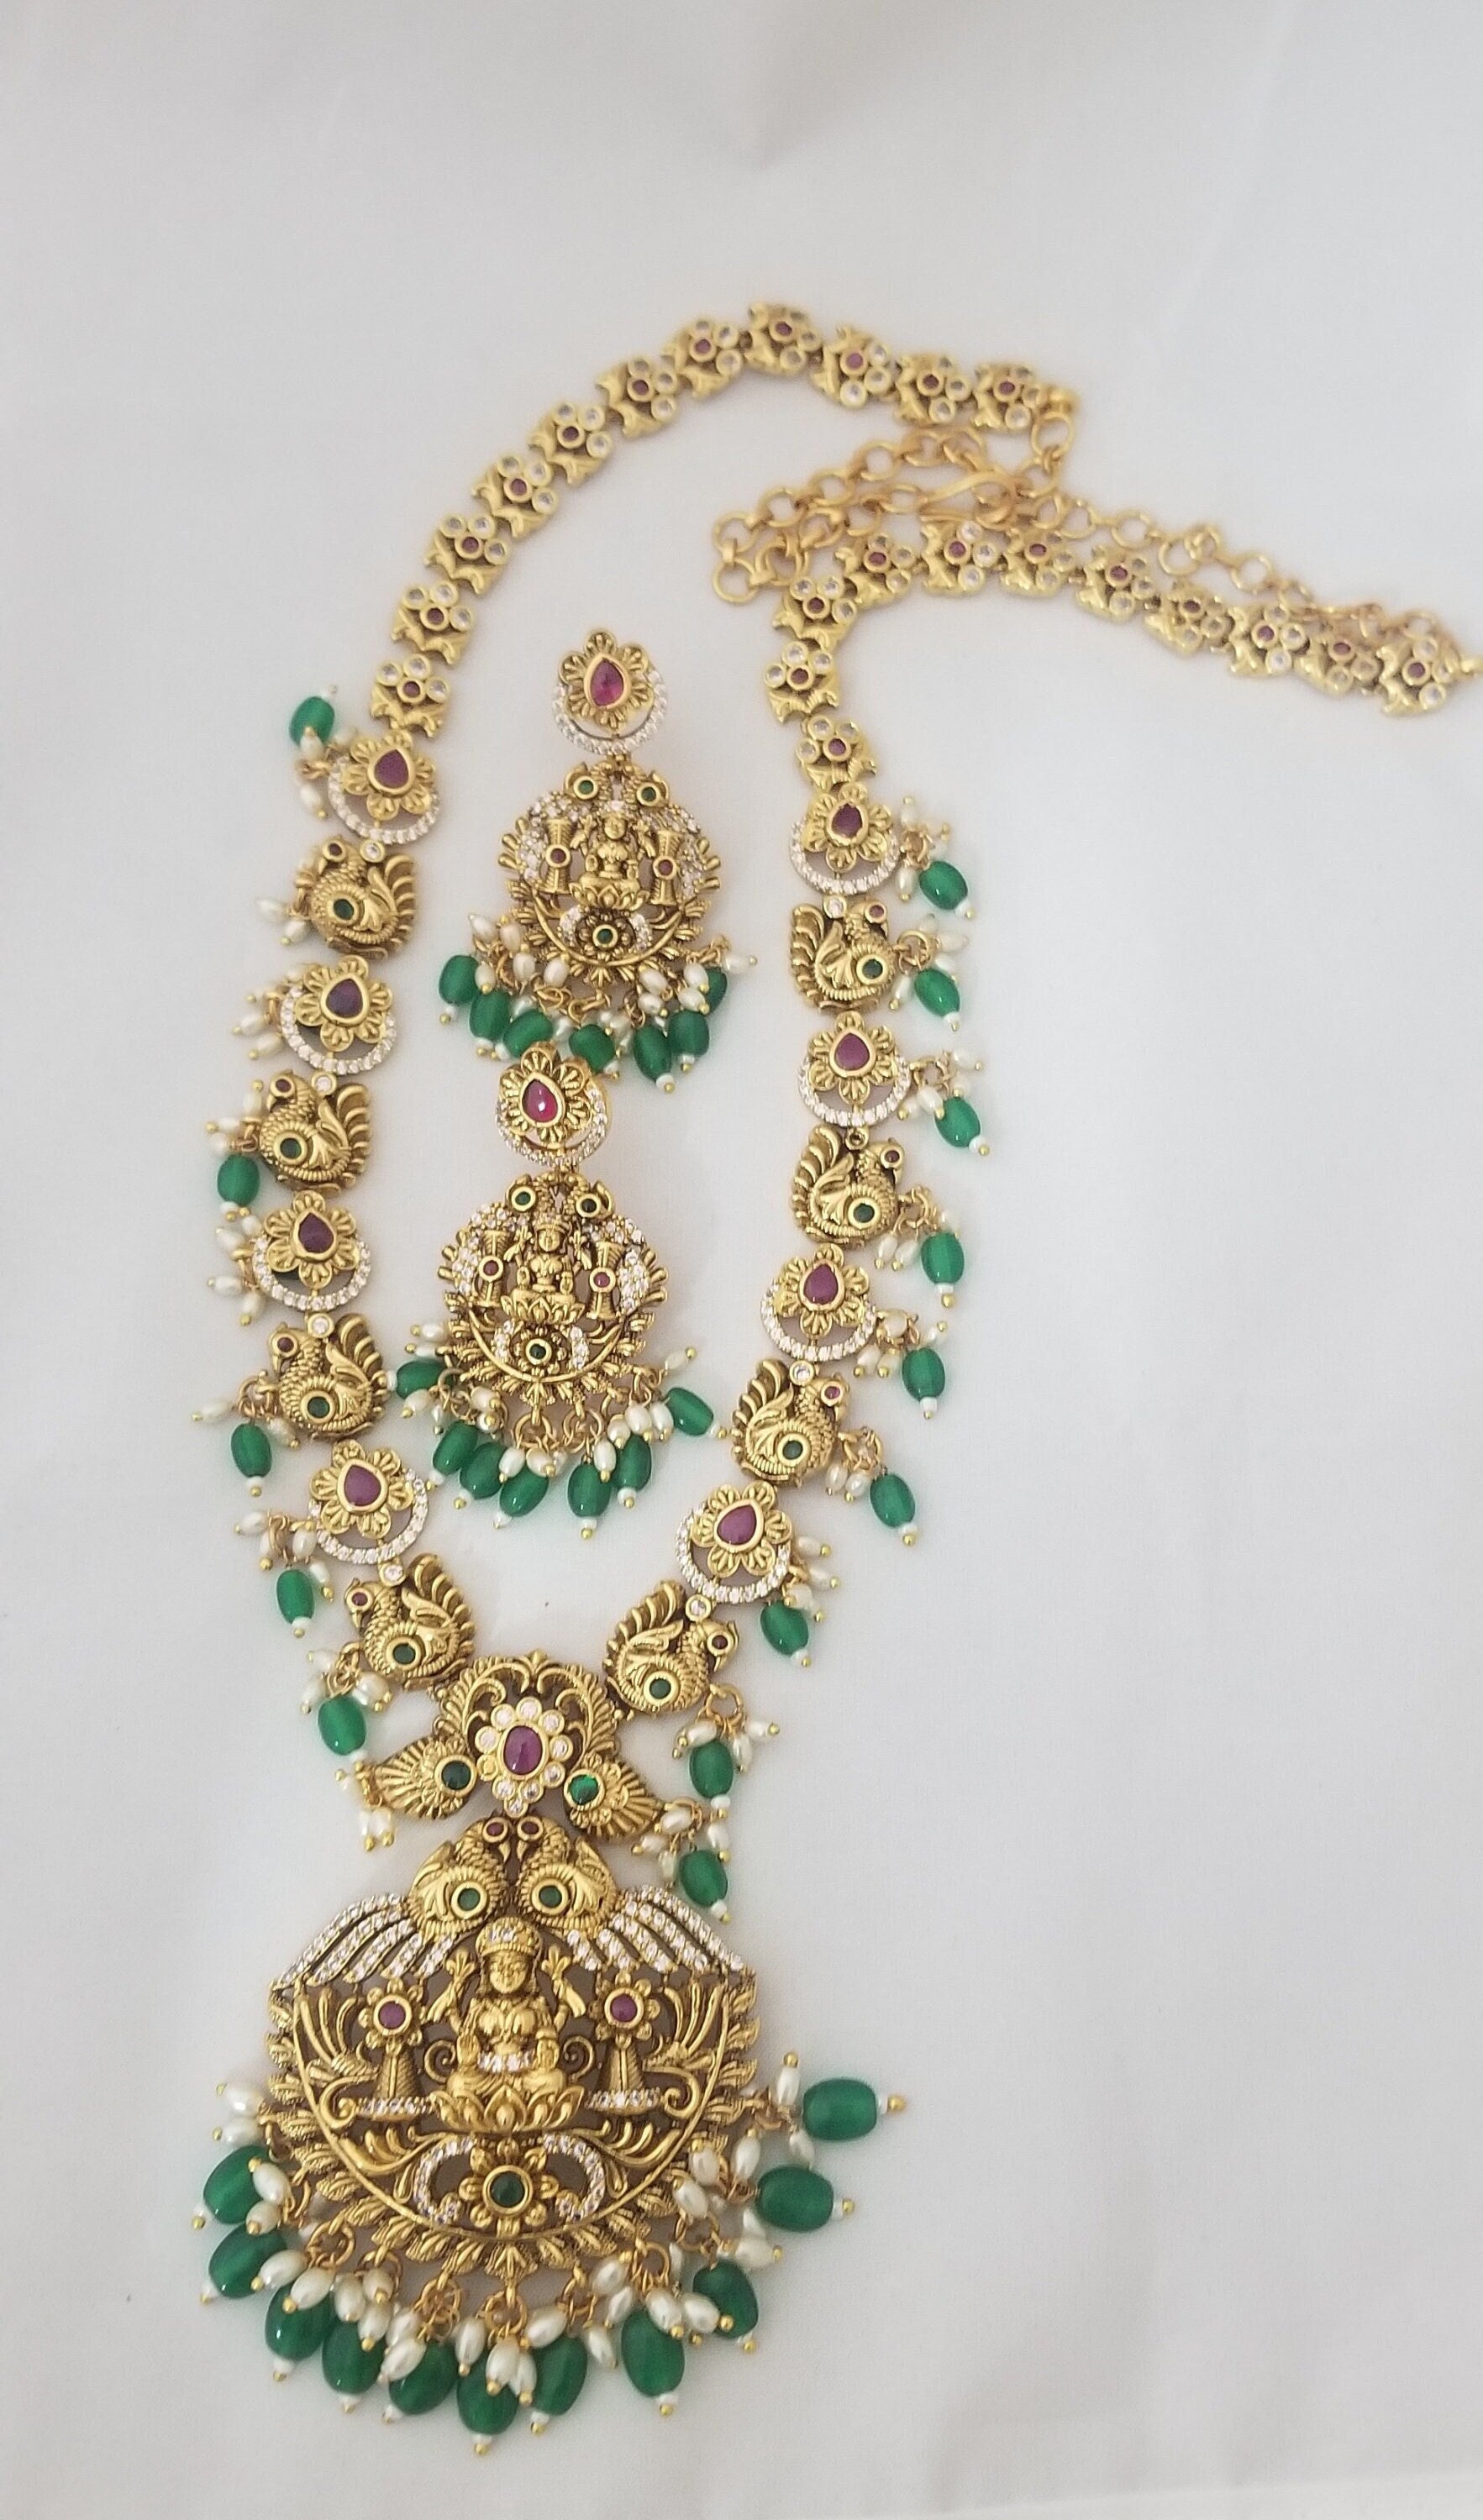 Lakshmi Peacock Premium quality Gold Jewelry Replica Haram with Precious green bead hangings with matching Earrings